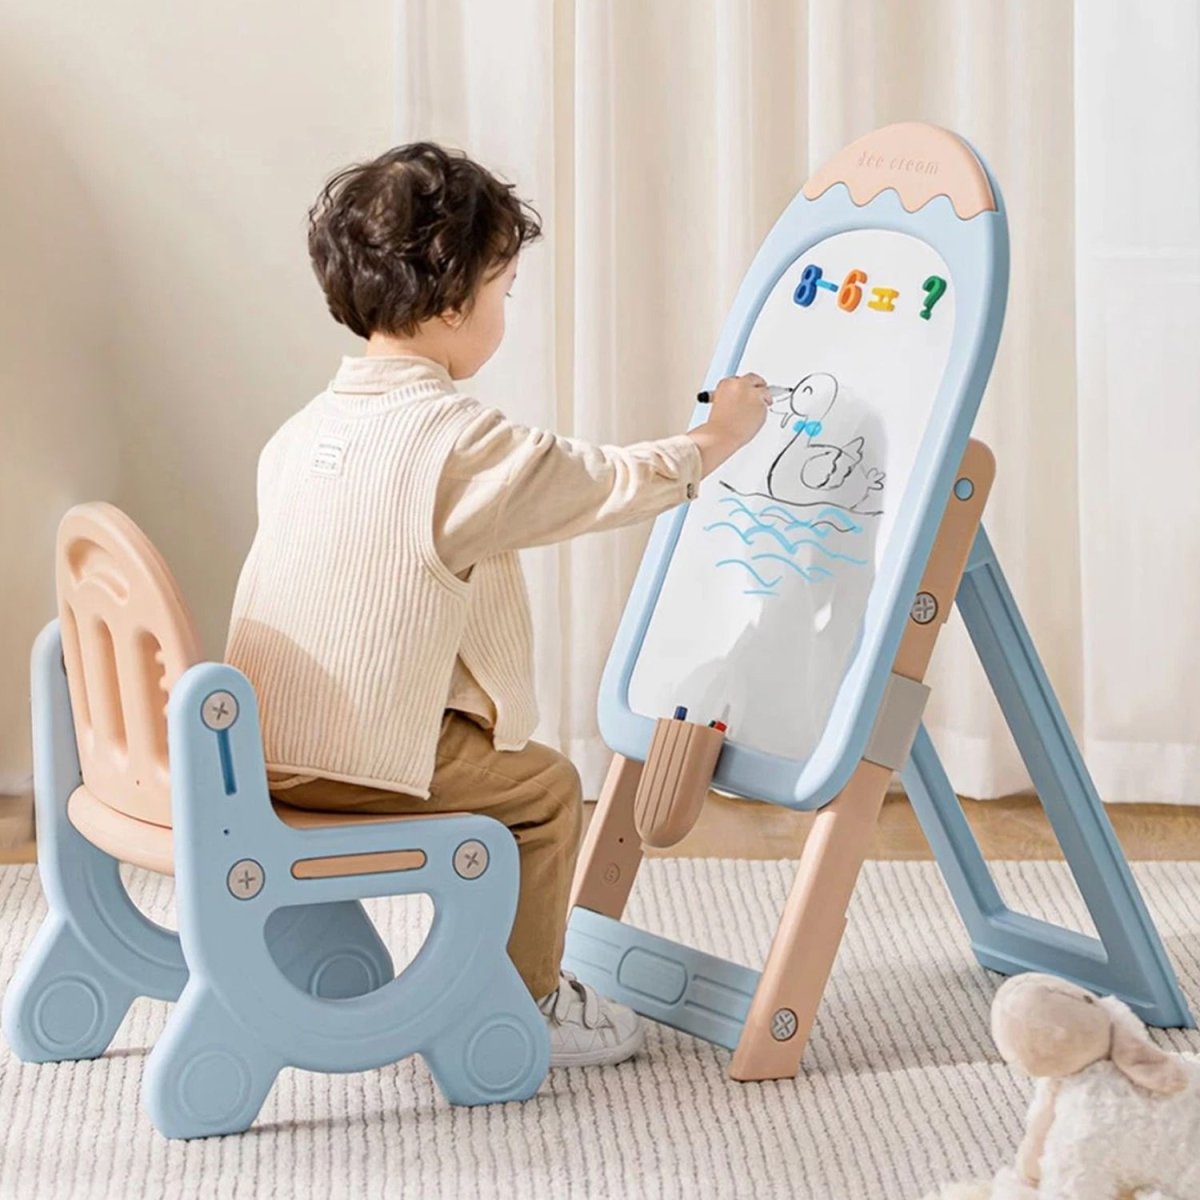 R for Rabbit Little Genius Candy- Set of Board & Chair-Blue - FNLGCCBB03